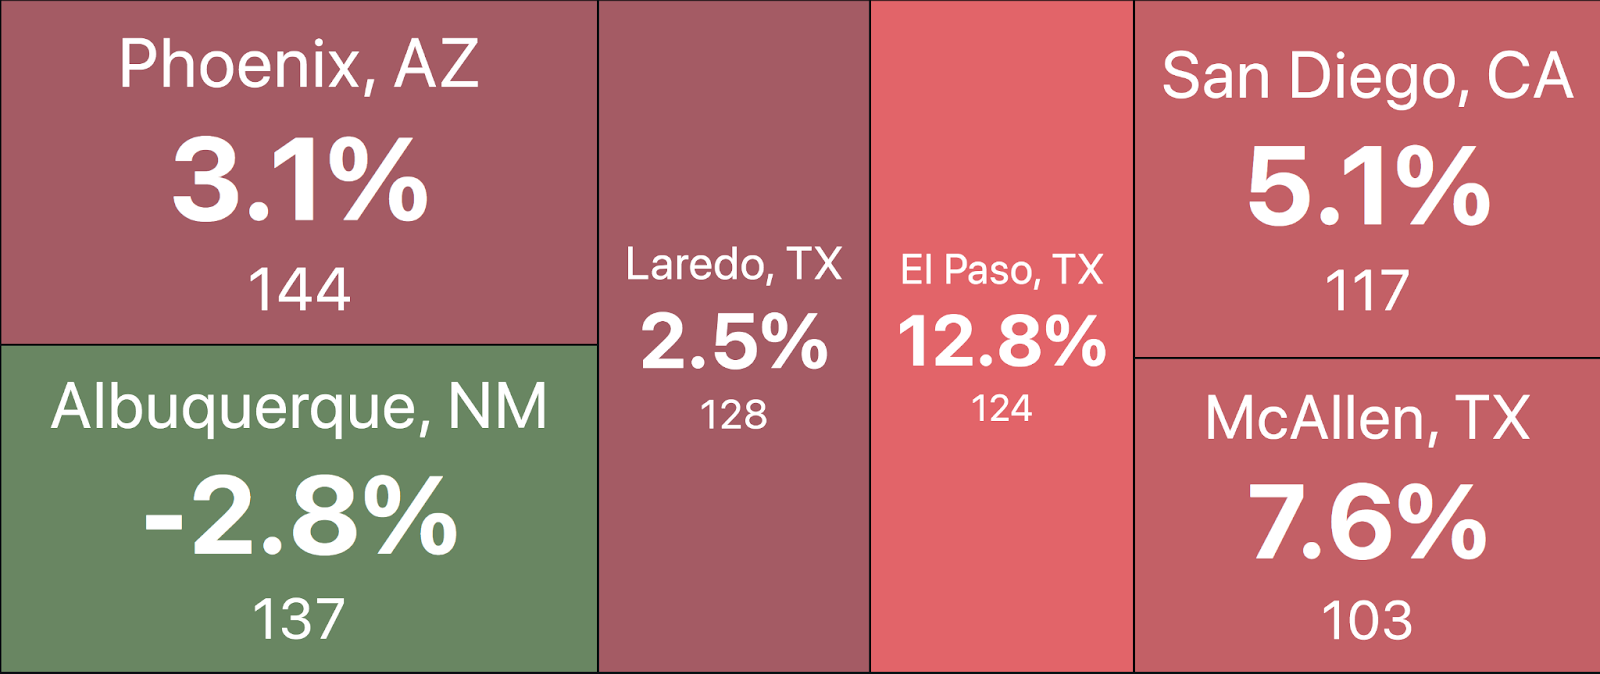 Borderlands: Texas-Mexico trade expected to top .5 trillion by 2050